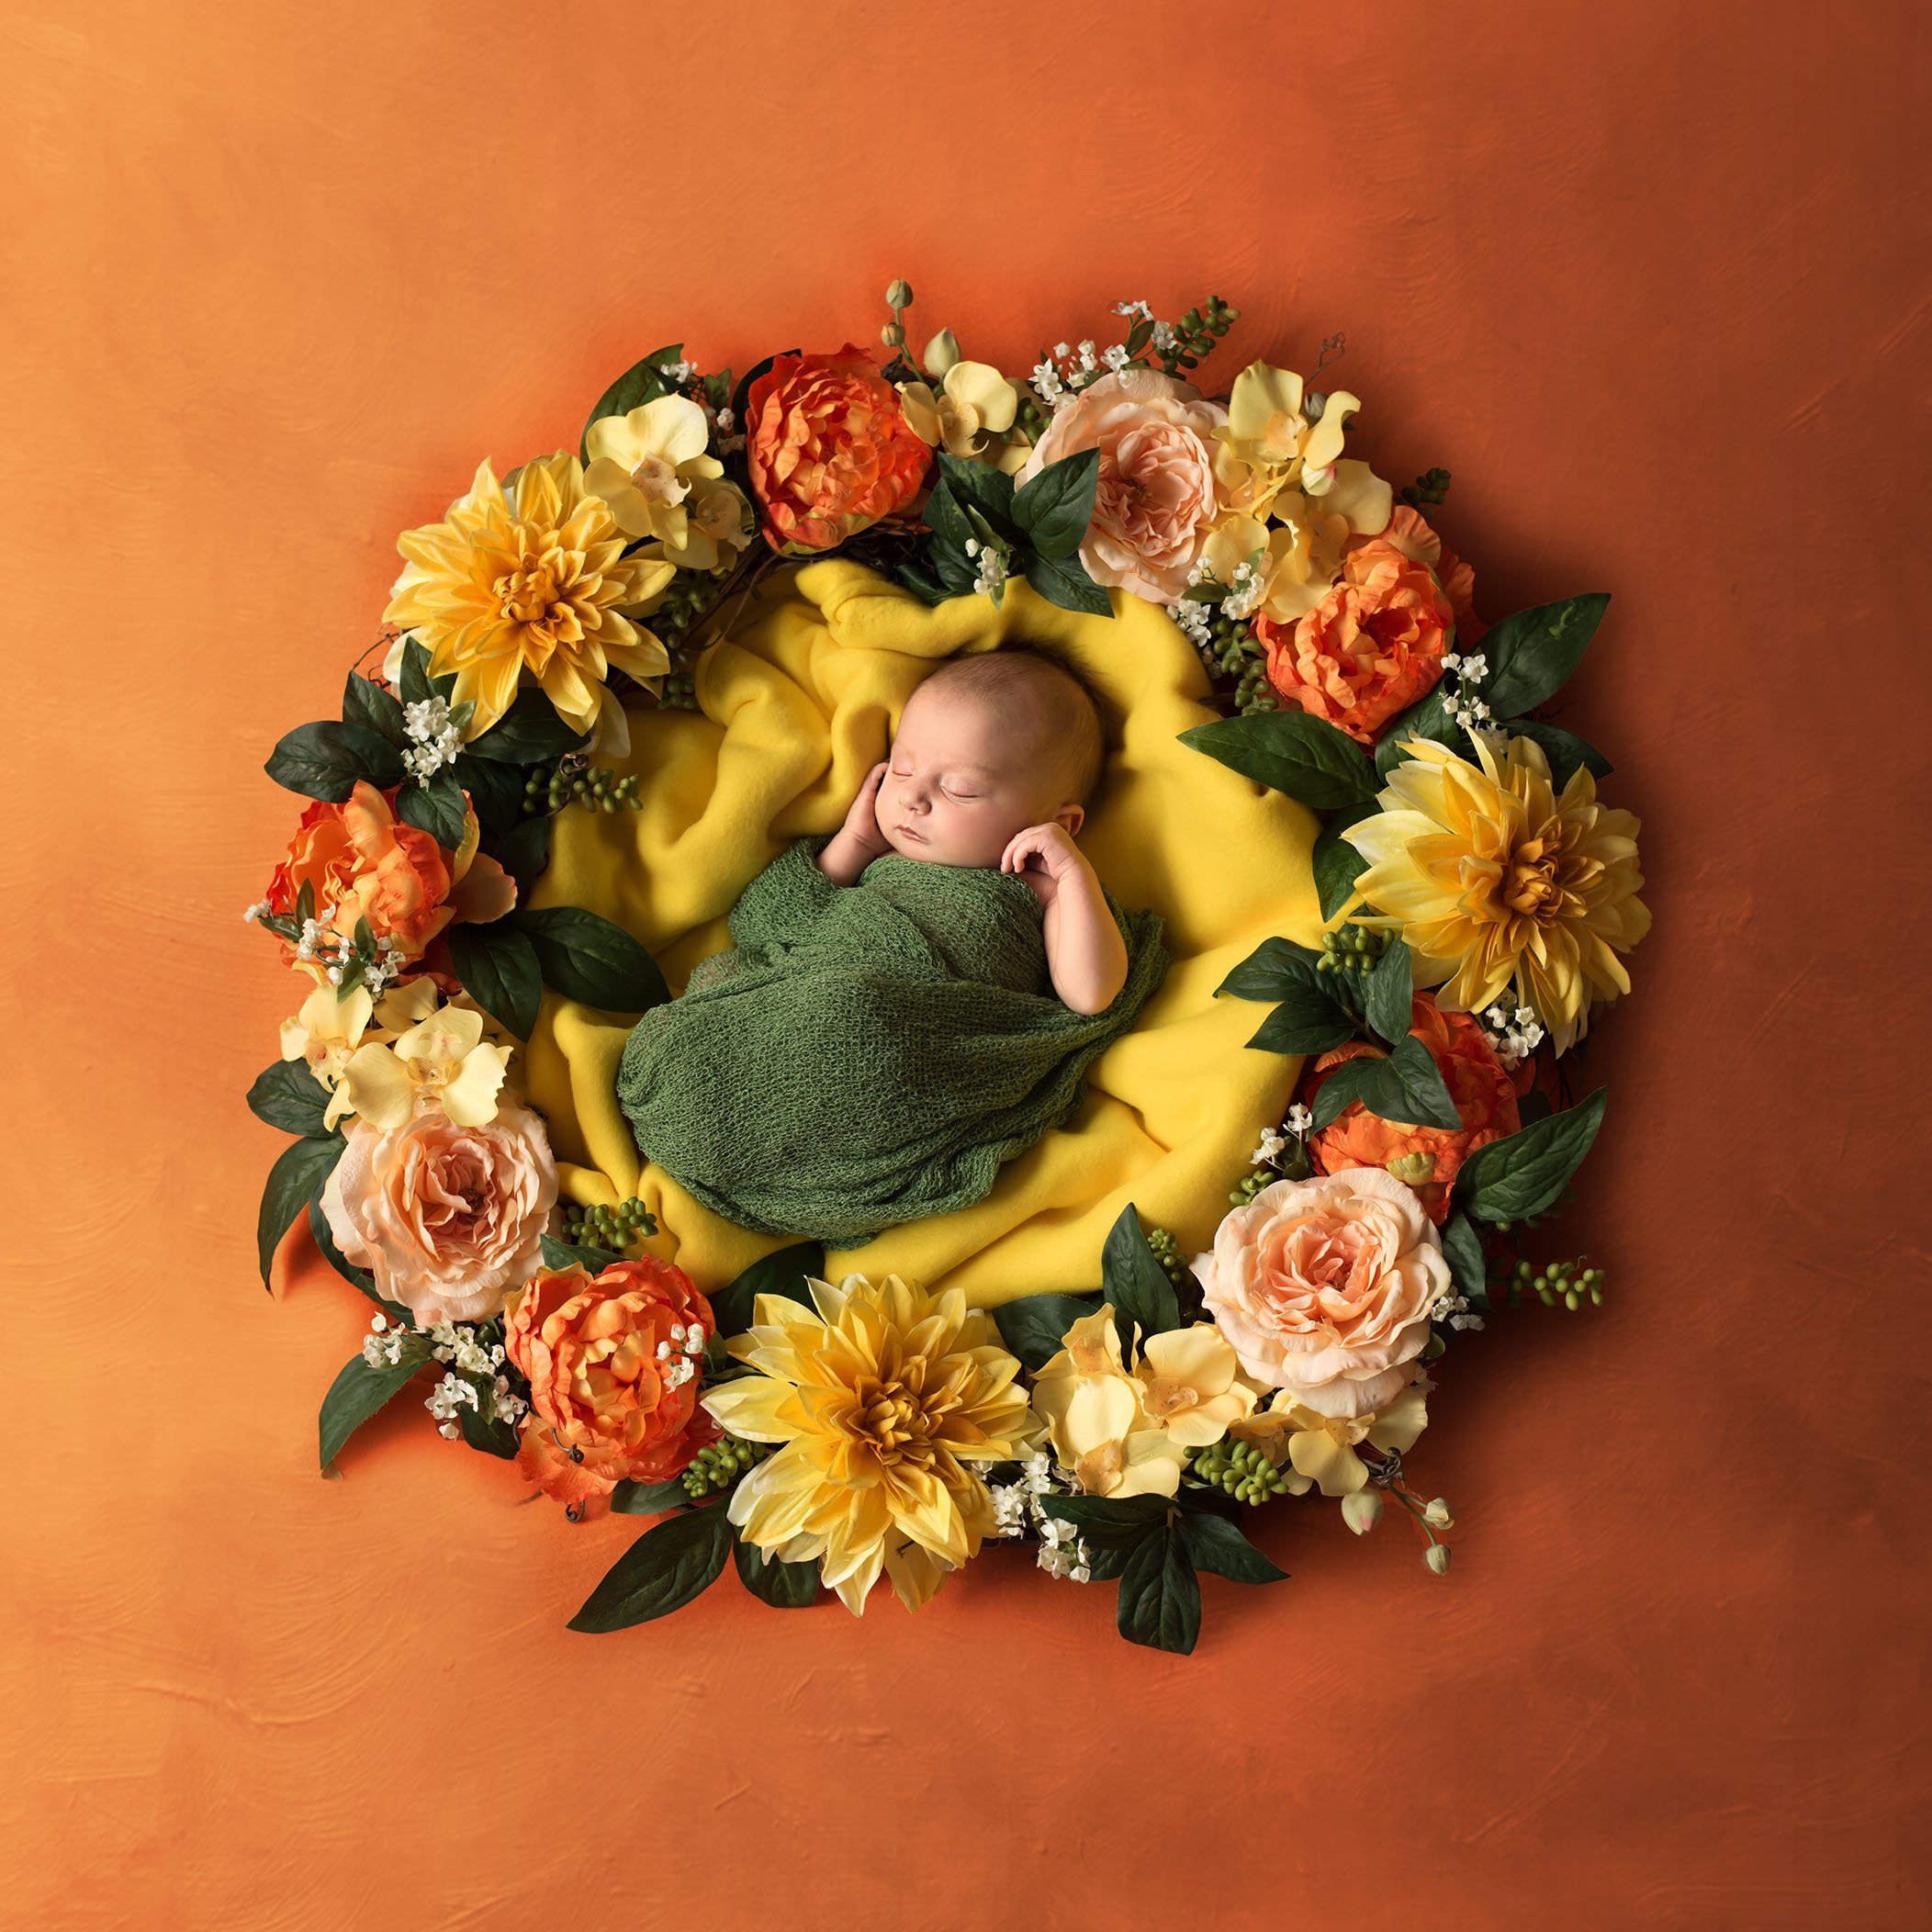 newborn baby girl nestled in orange and yellow floral wreath on orange painted backdrop